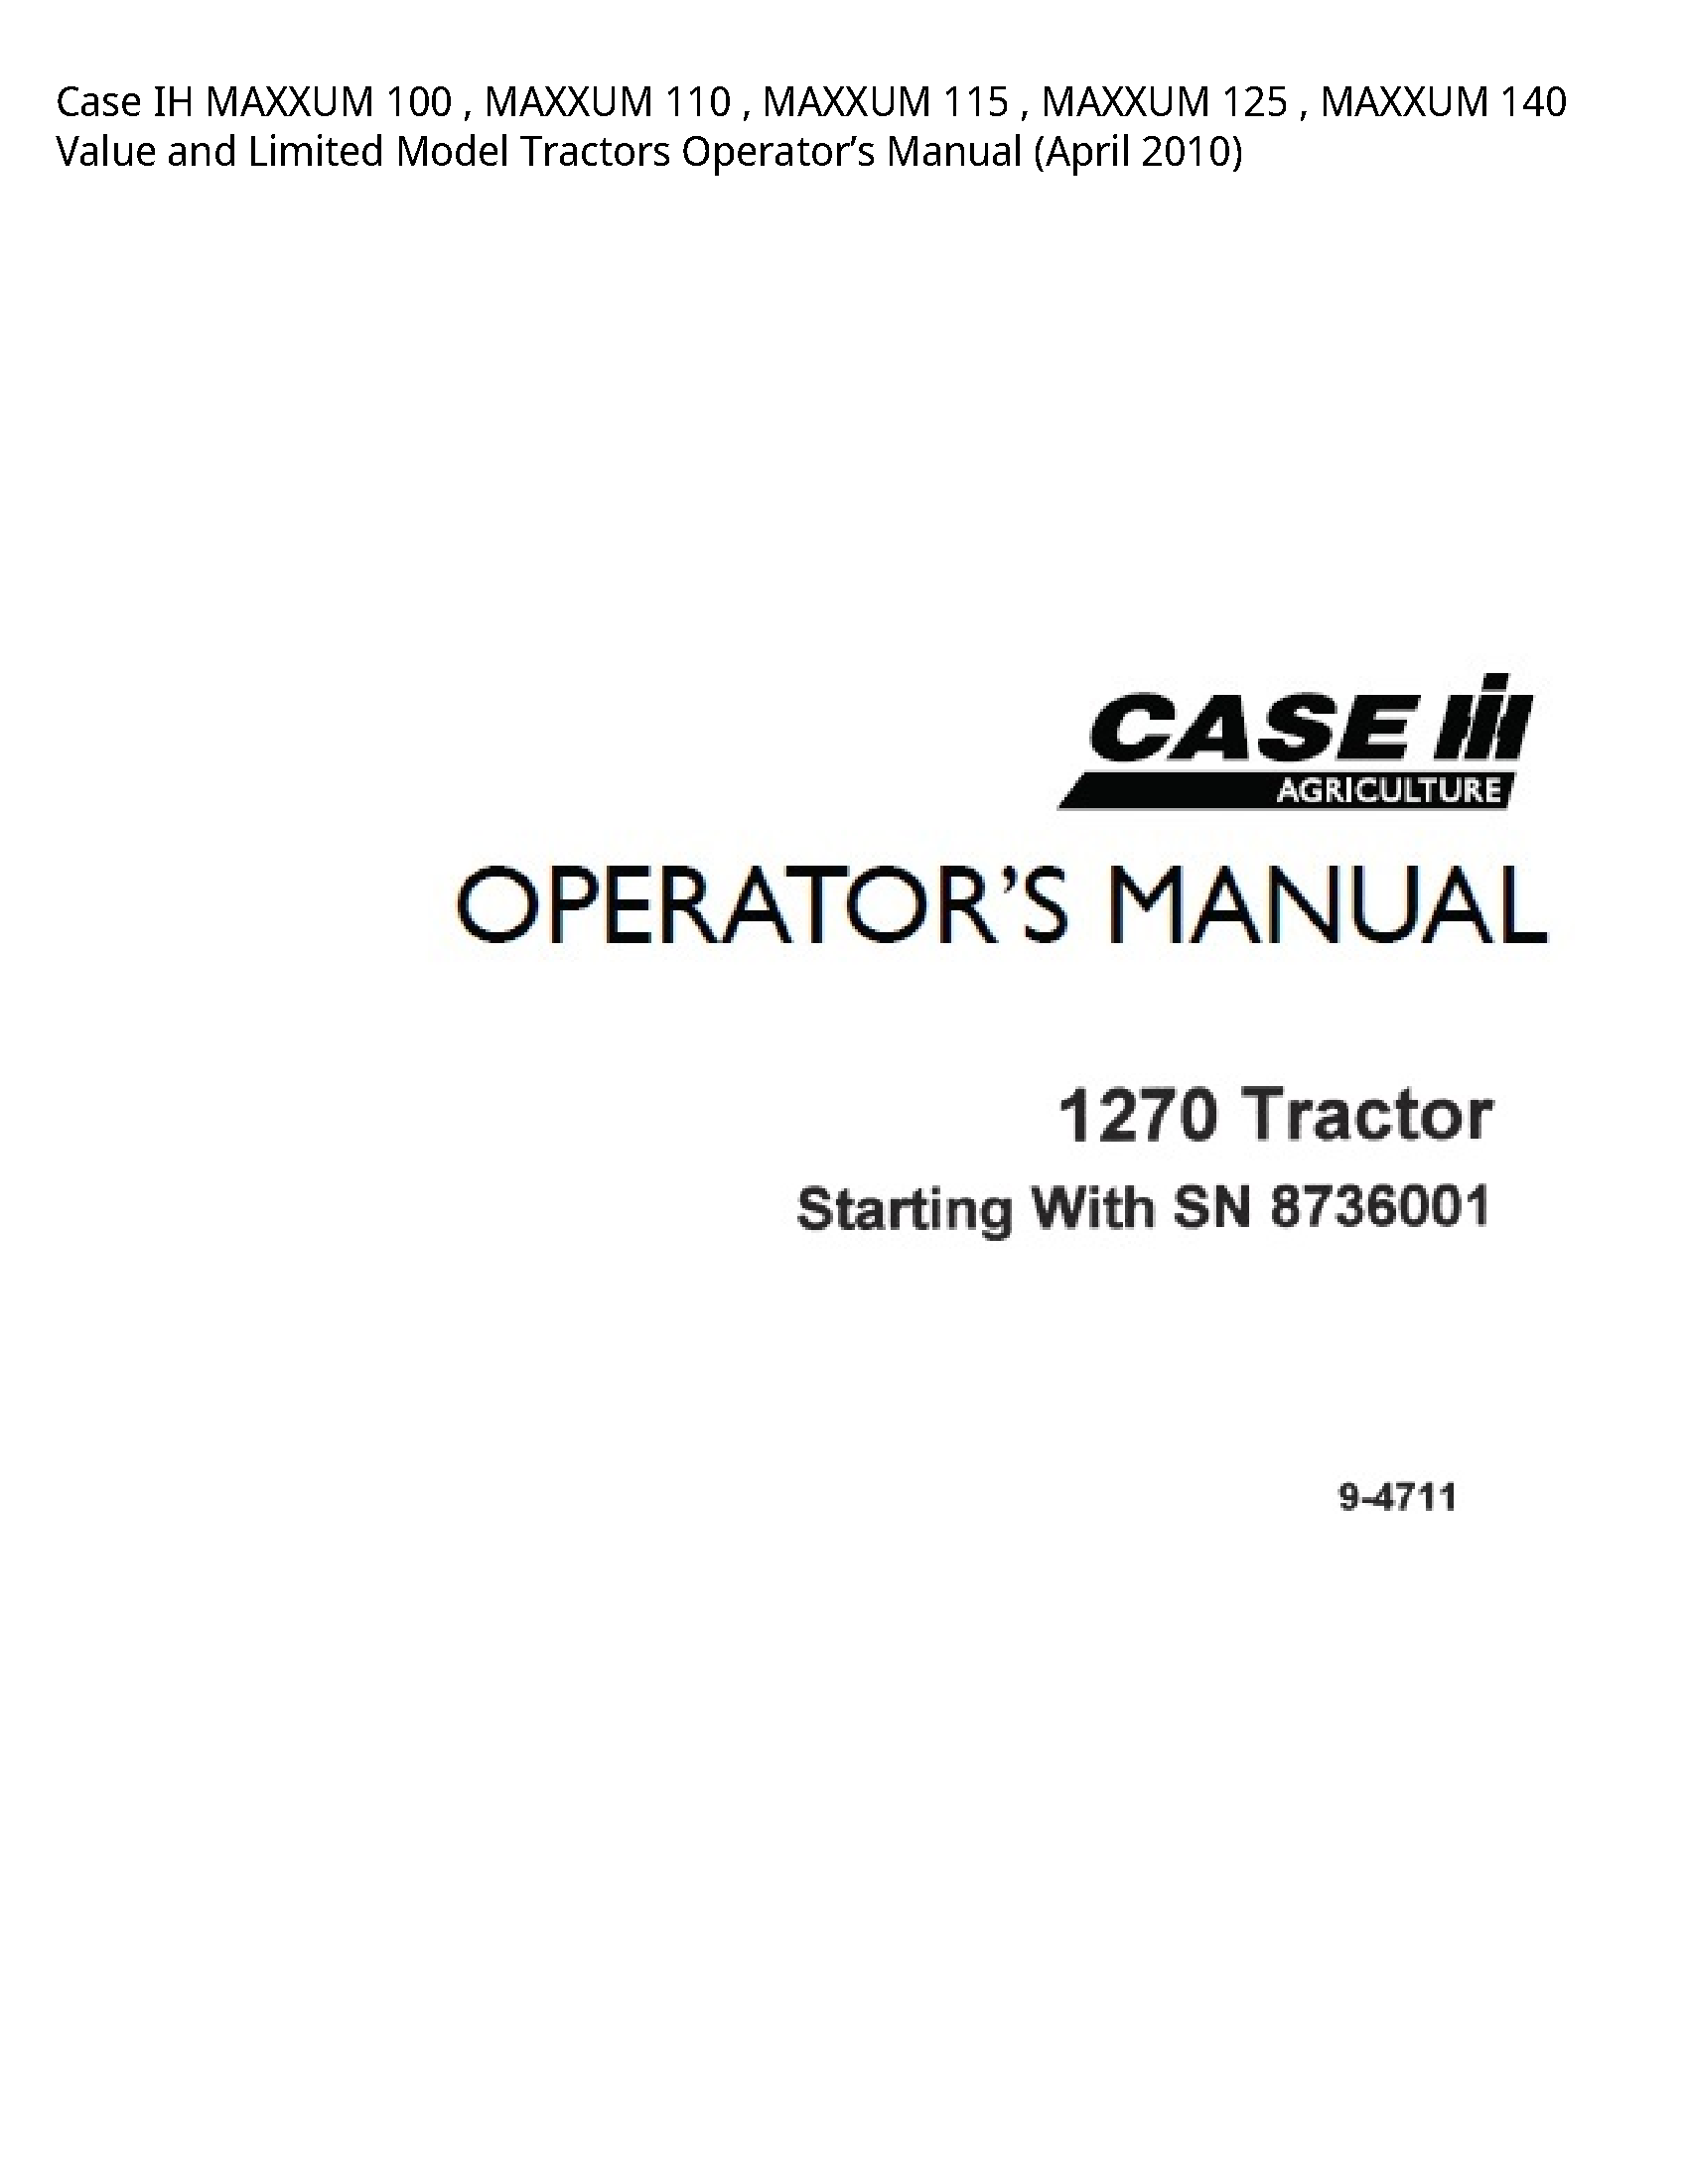 Case/Case IH 100 IH MAXXUM MAXXUM MAXXUM MAXXUM MAXXUM Value  Limited Model Tractors Operator’s manual